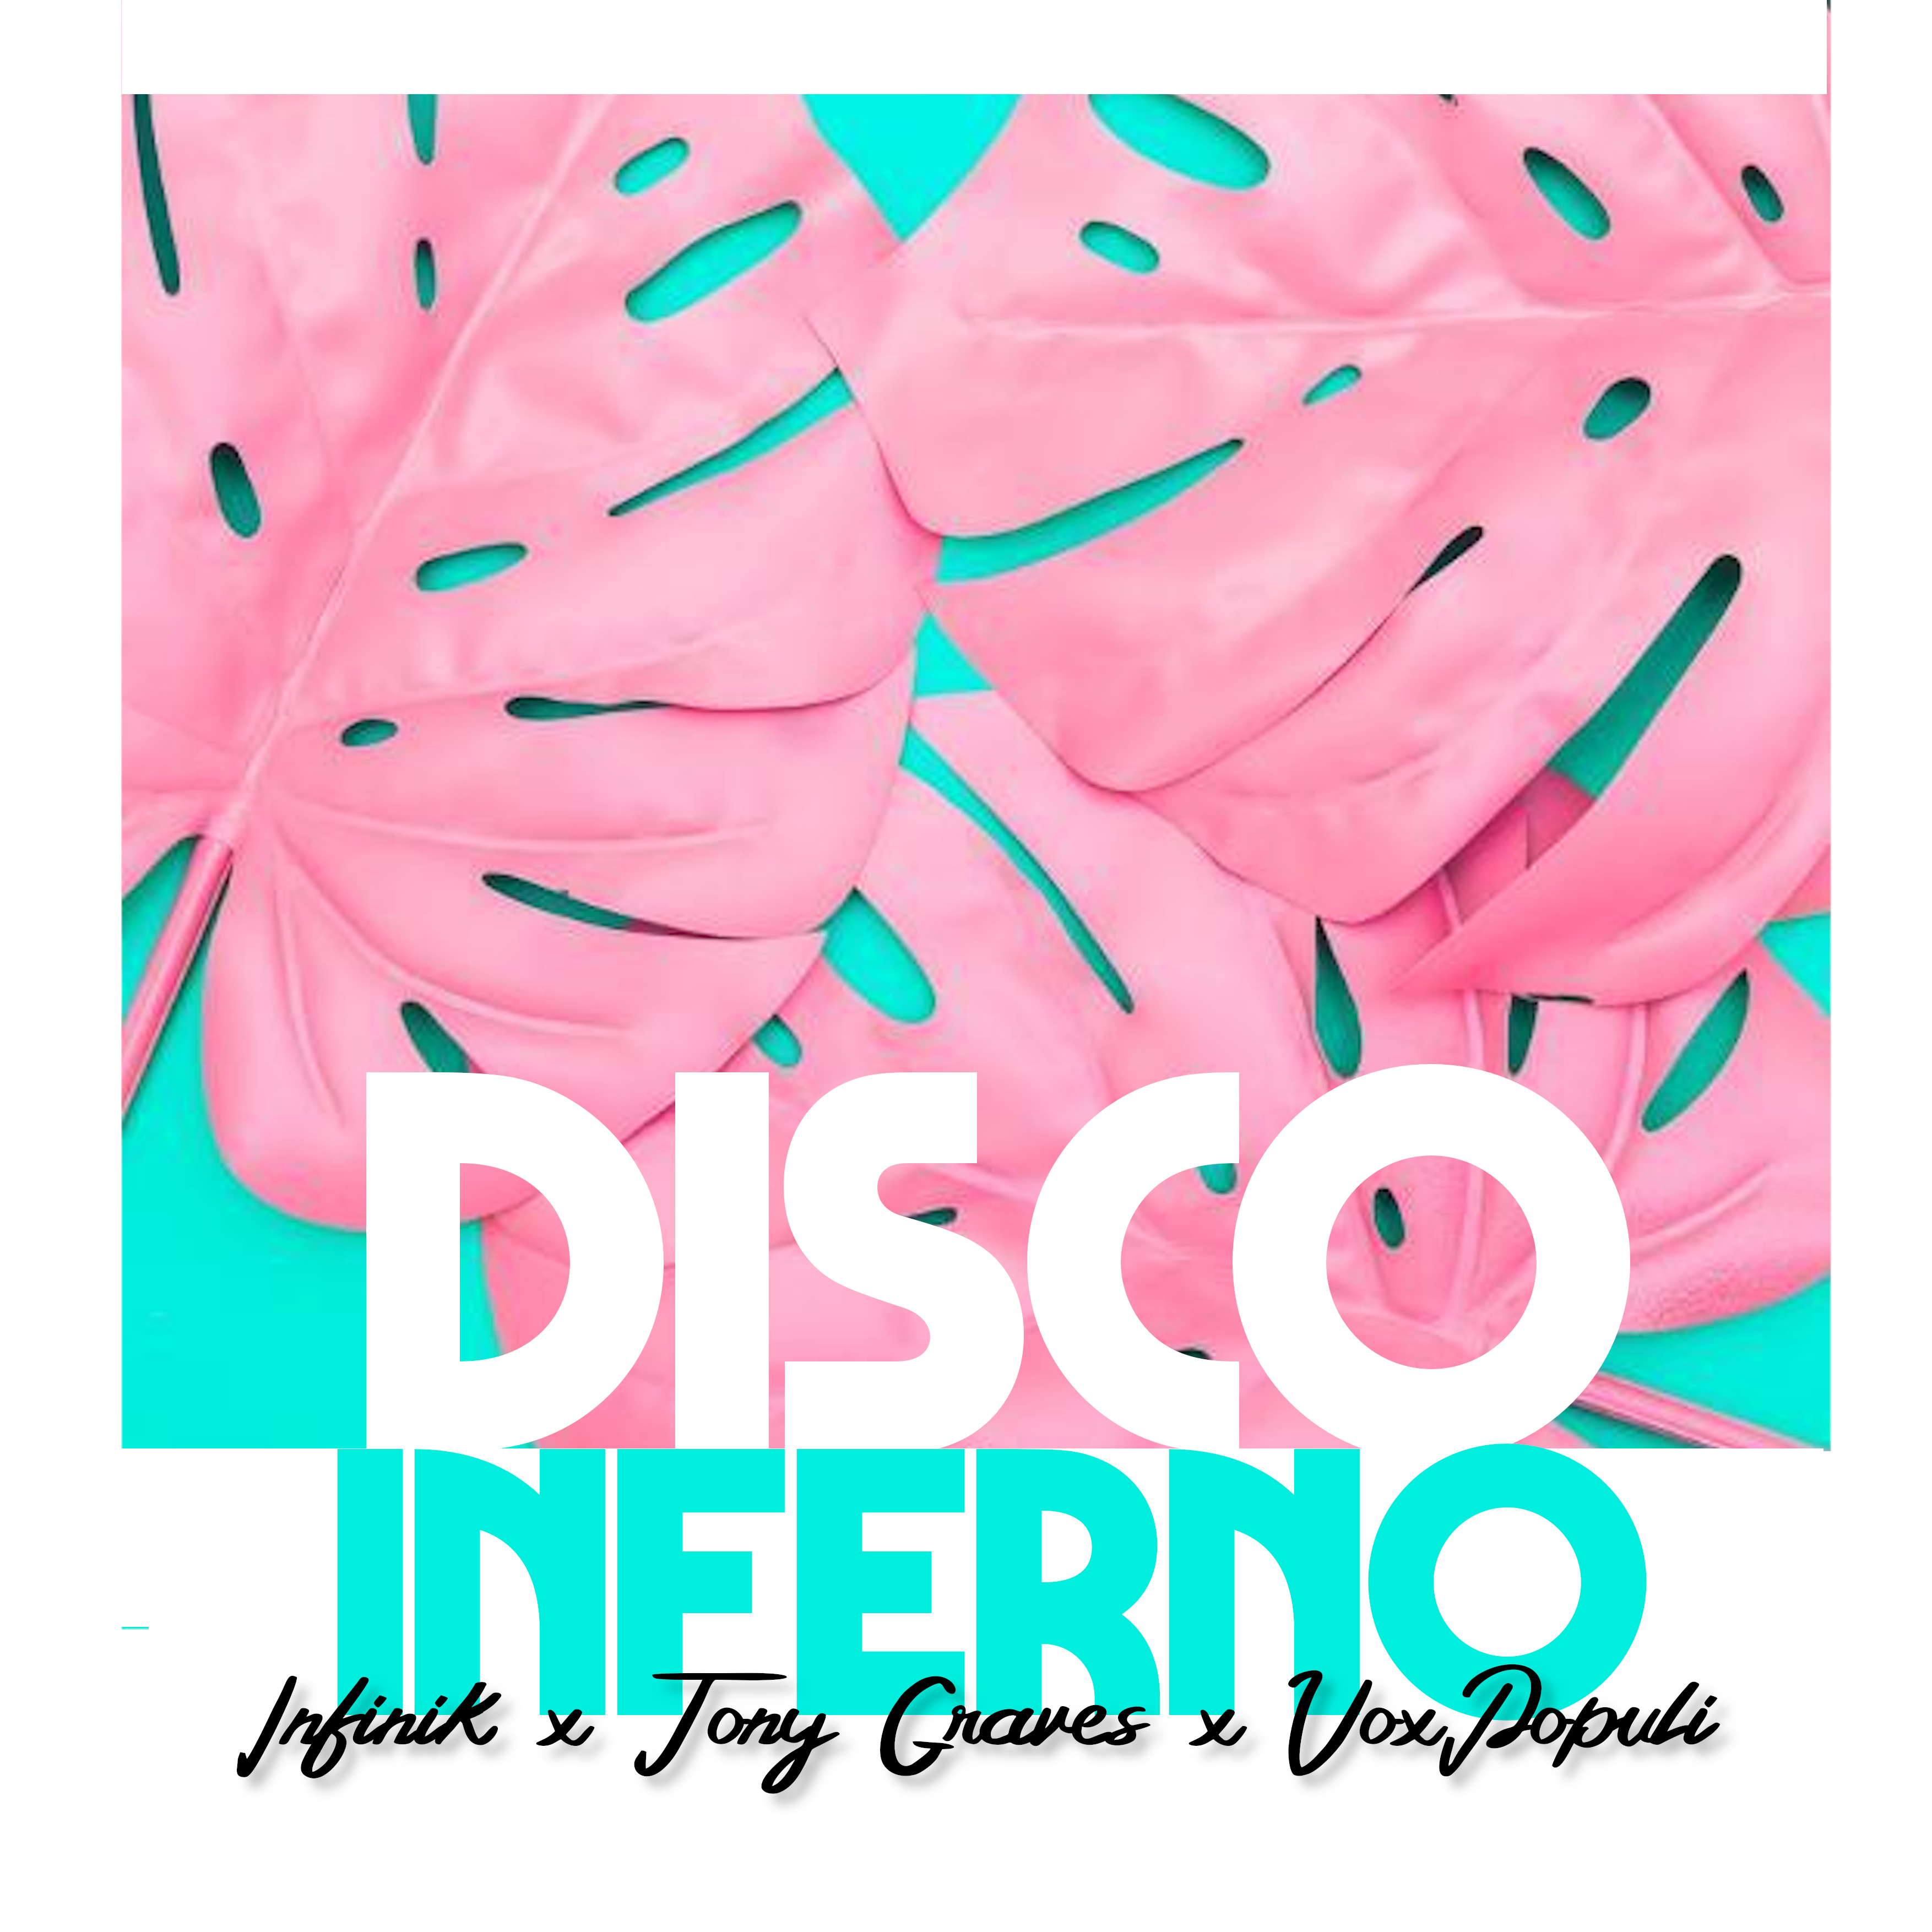 Disco Inferno single release by Infinik and Tony graves ,produced by VoxPopuli